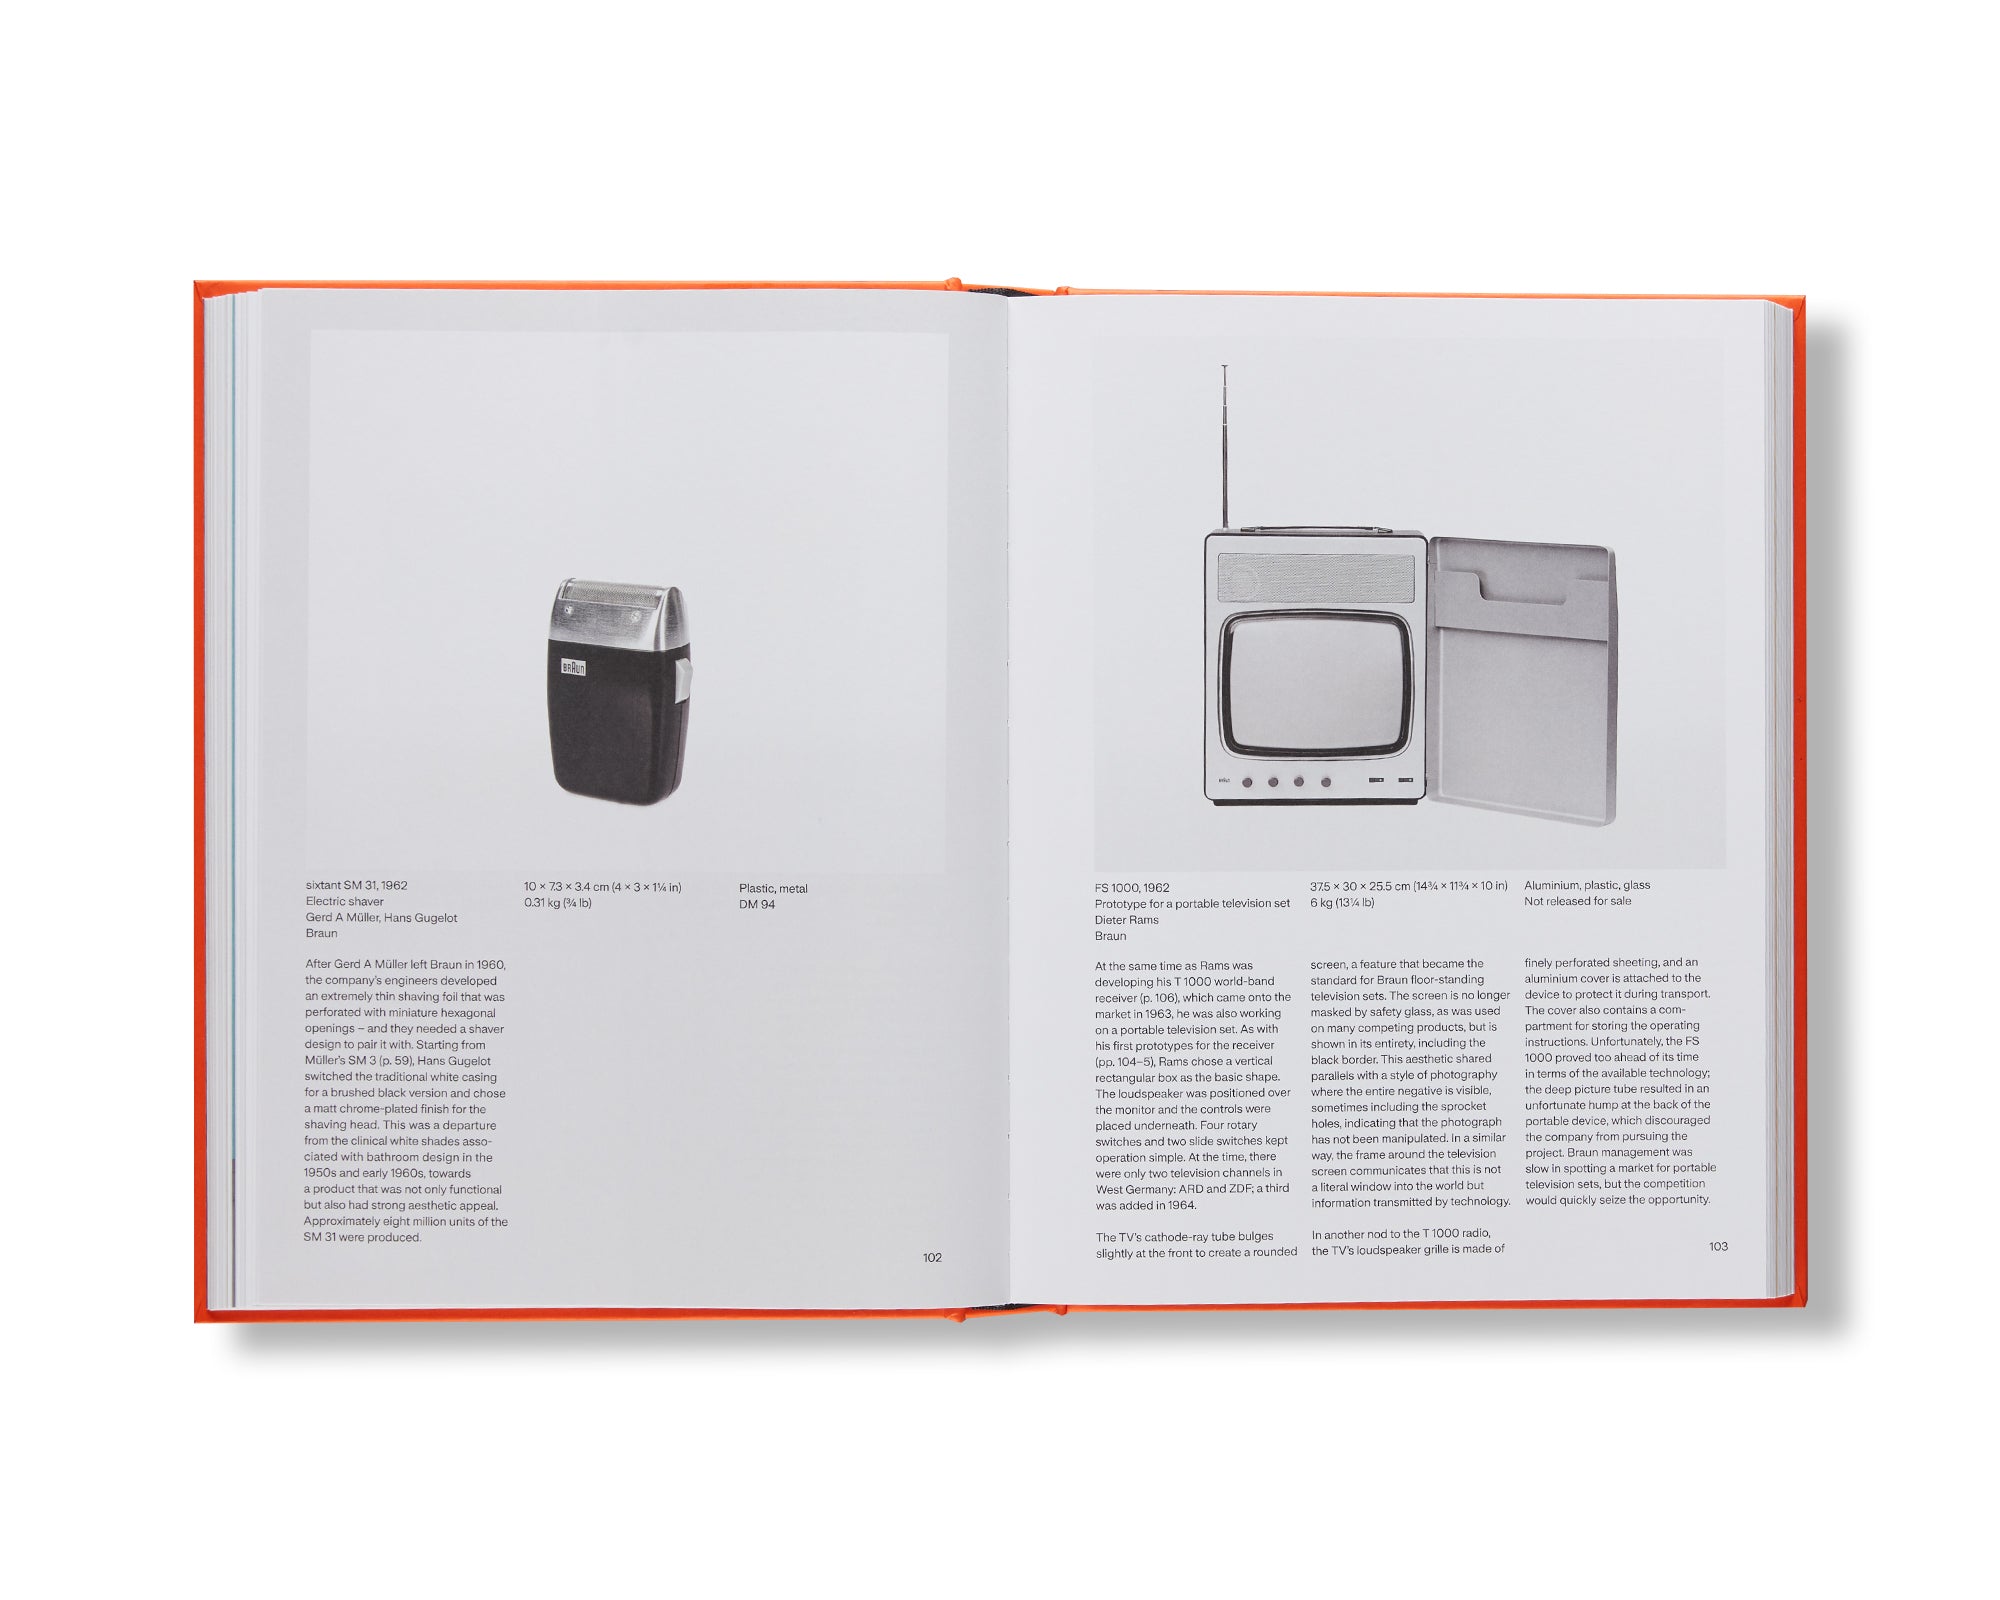 THE COMPLETE WORKS by Dieter Rams